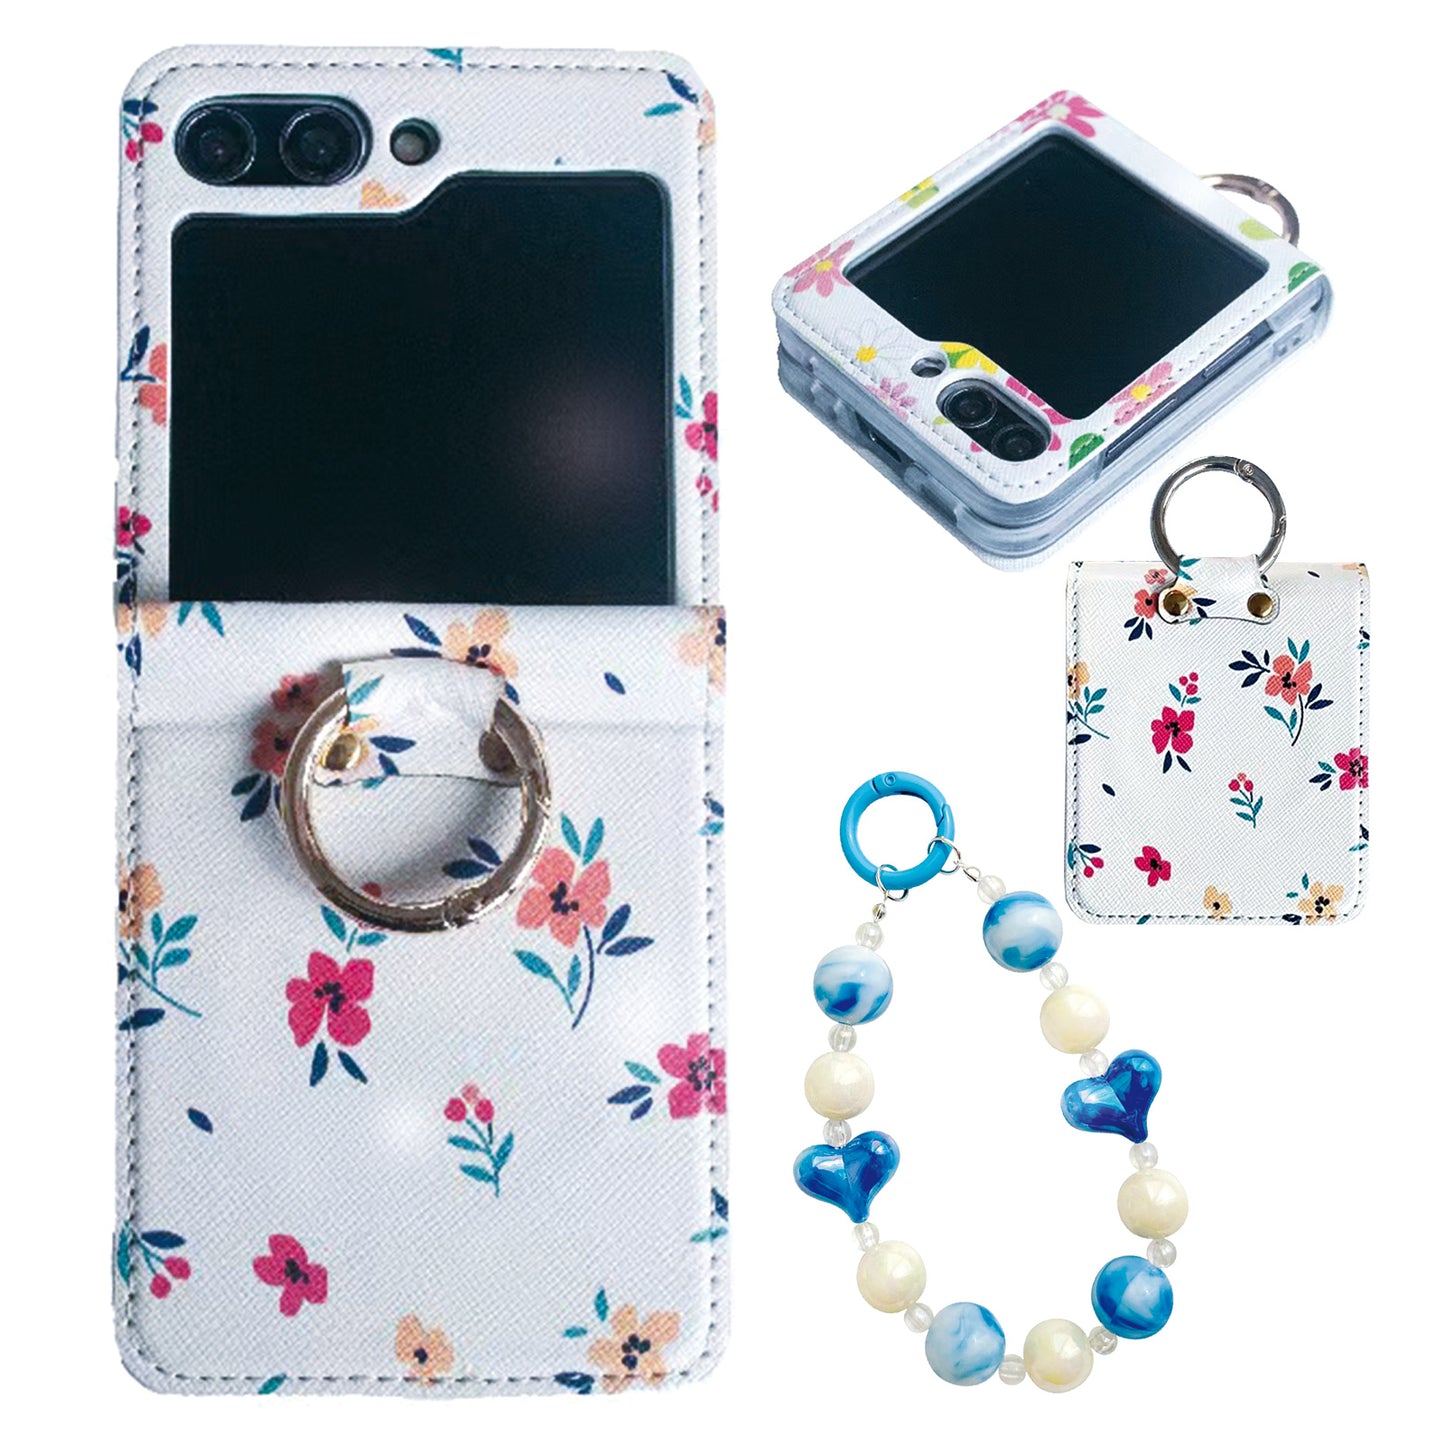 Floral Cases for Samsung Galaxy Z Flip 5 Case with Crossbody Strap